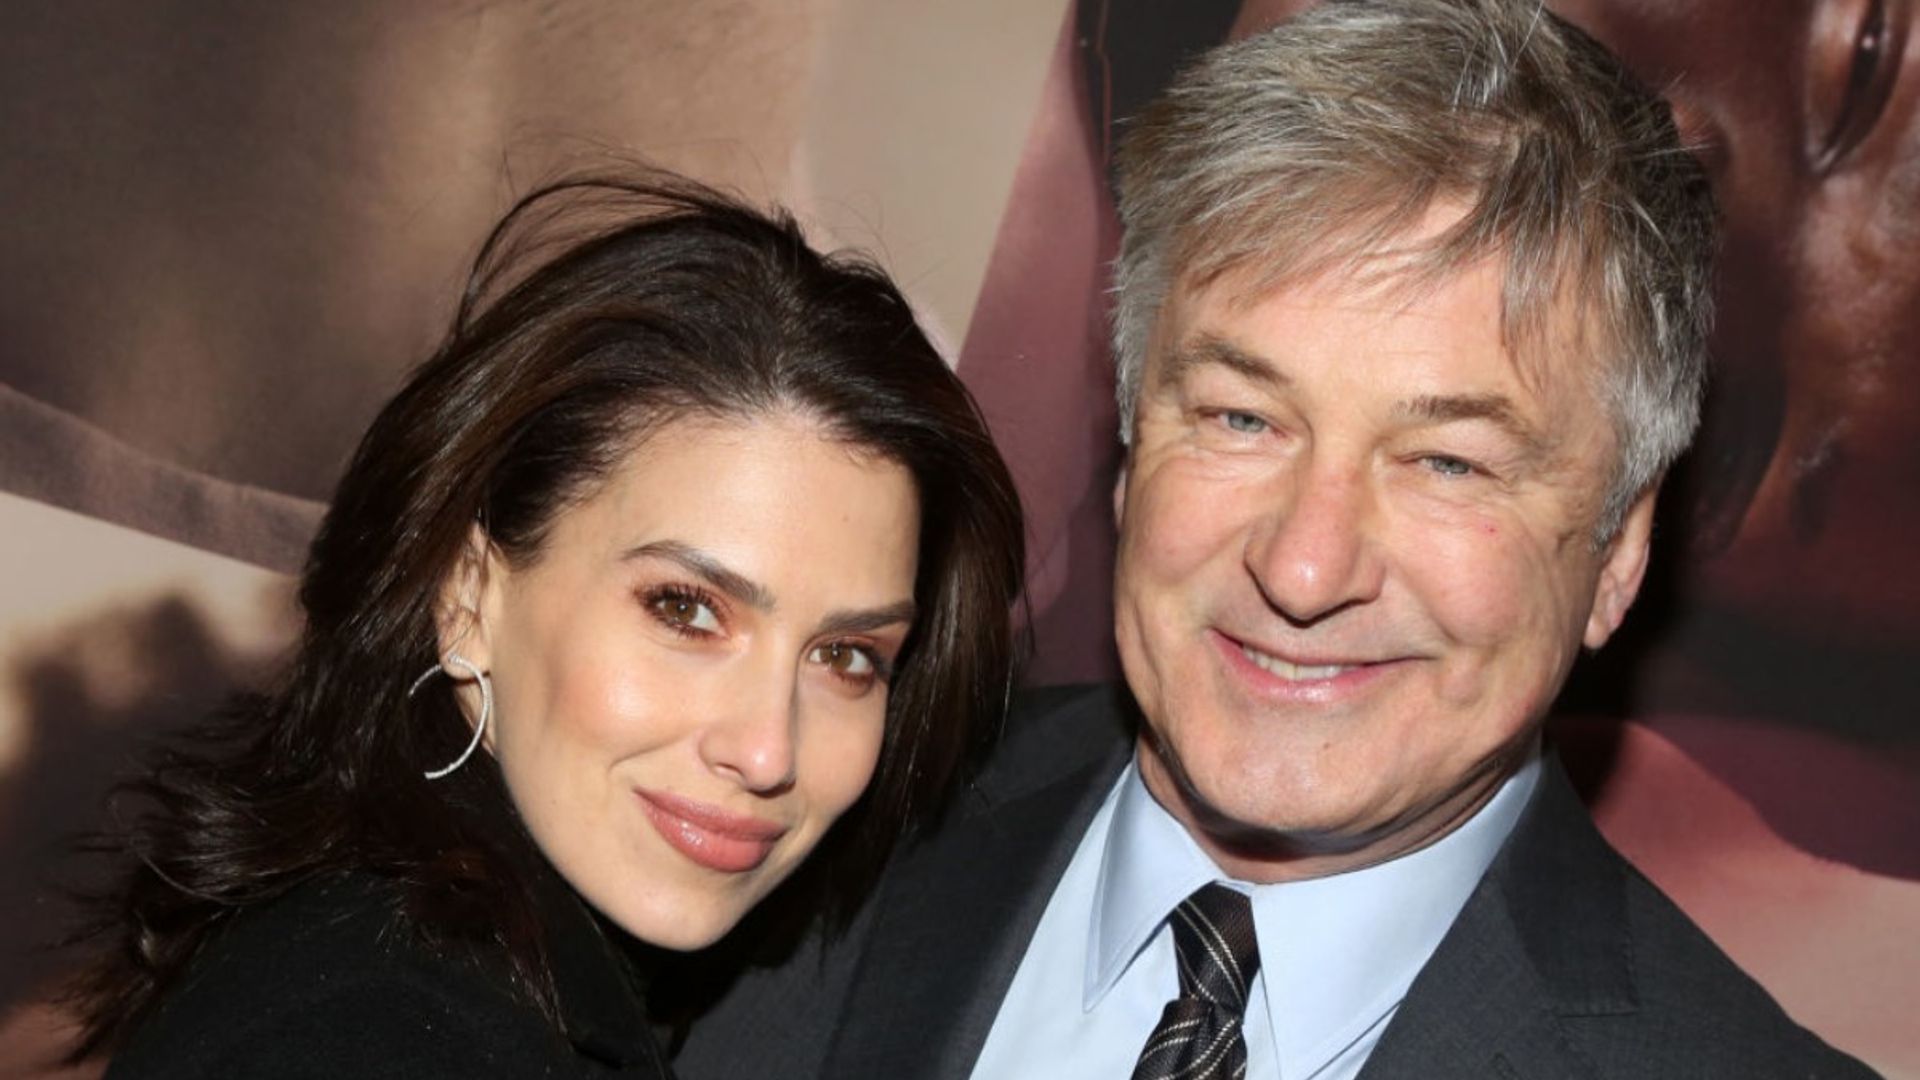 Alec Baldwin’s wife Hilaria welcomes fifth child and looks amazing in post-baby photo